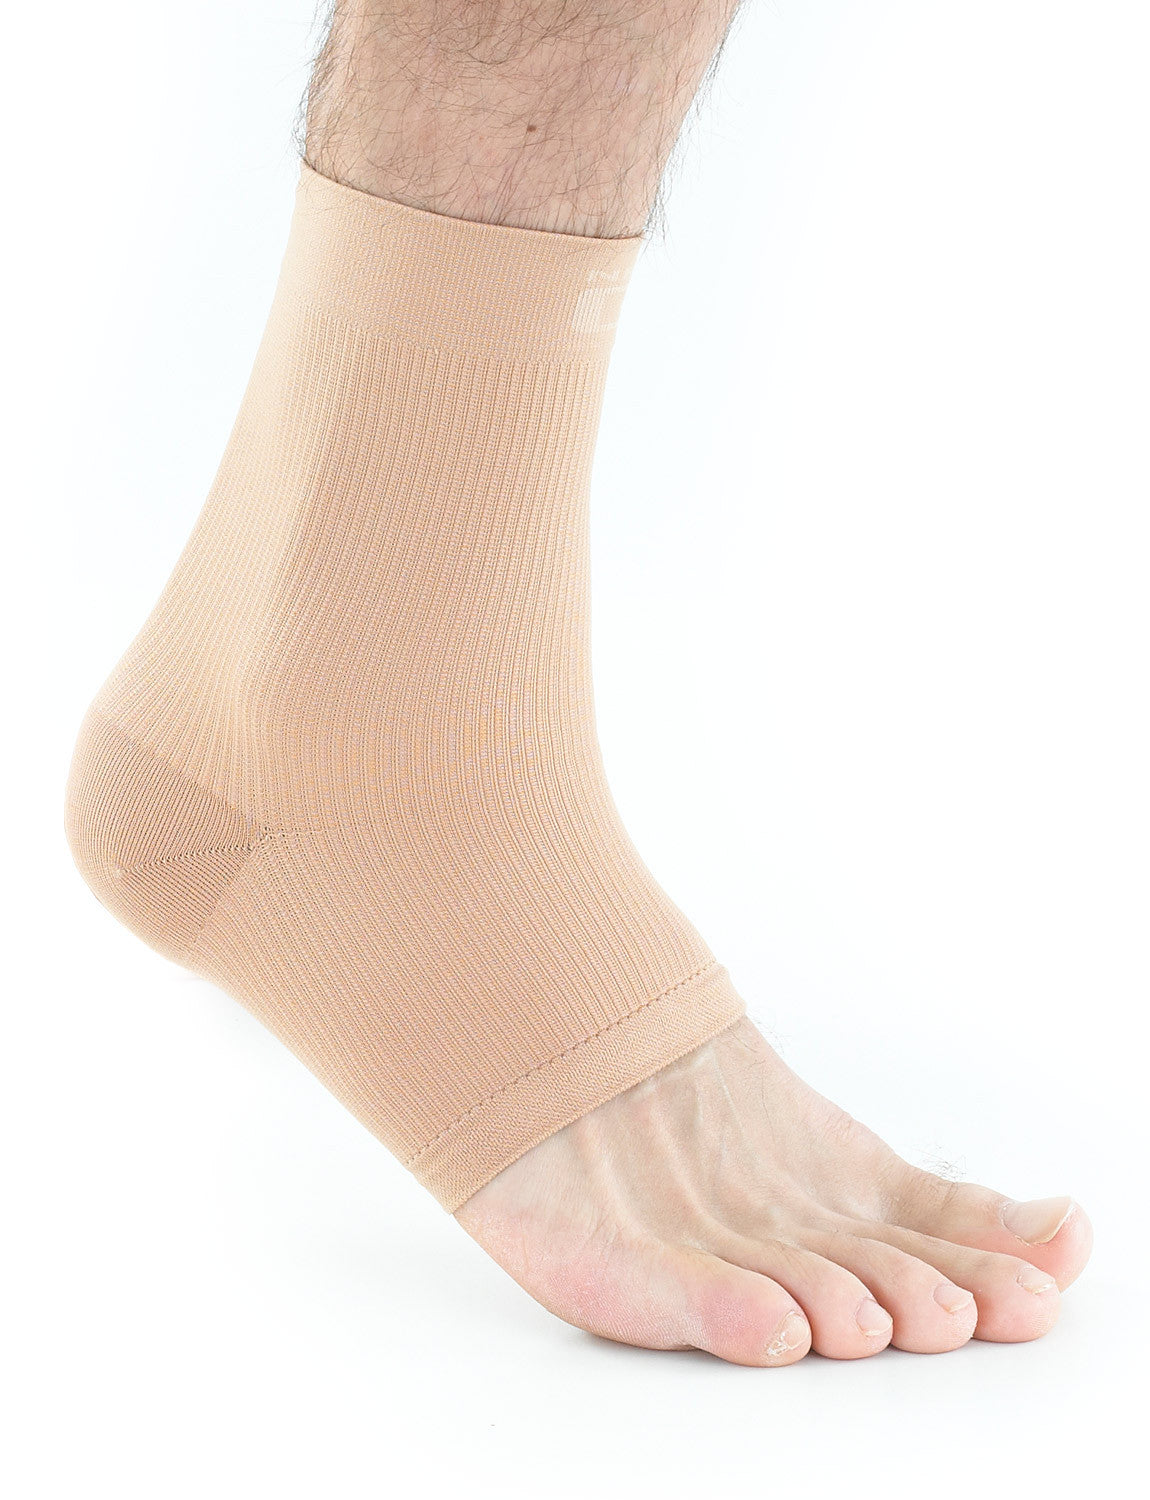 Neo-G Airflow Ankle Compression Sleeve - Sports Daily Wear